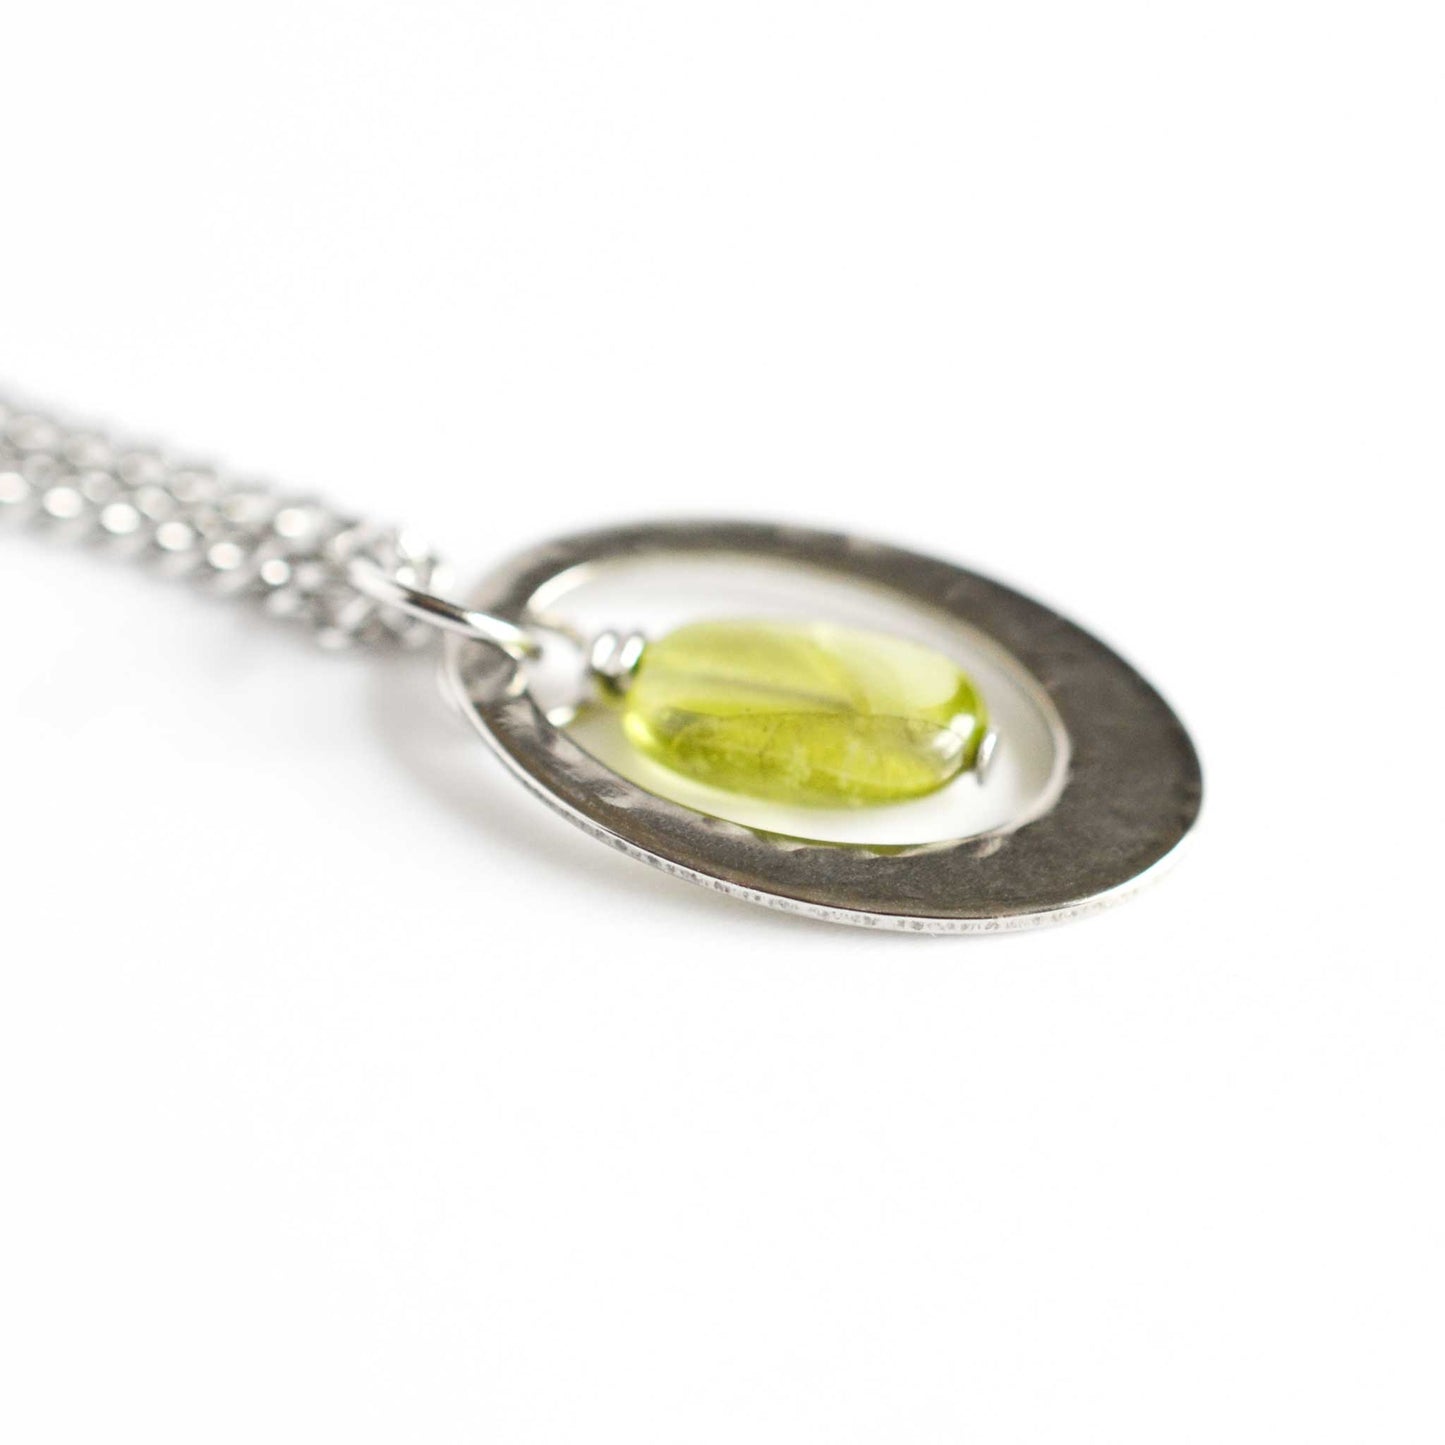 Close up view of green Peridot and silver stainless steel oval pendant necklace.